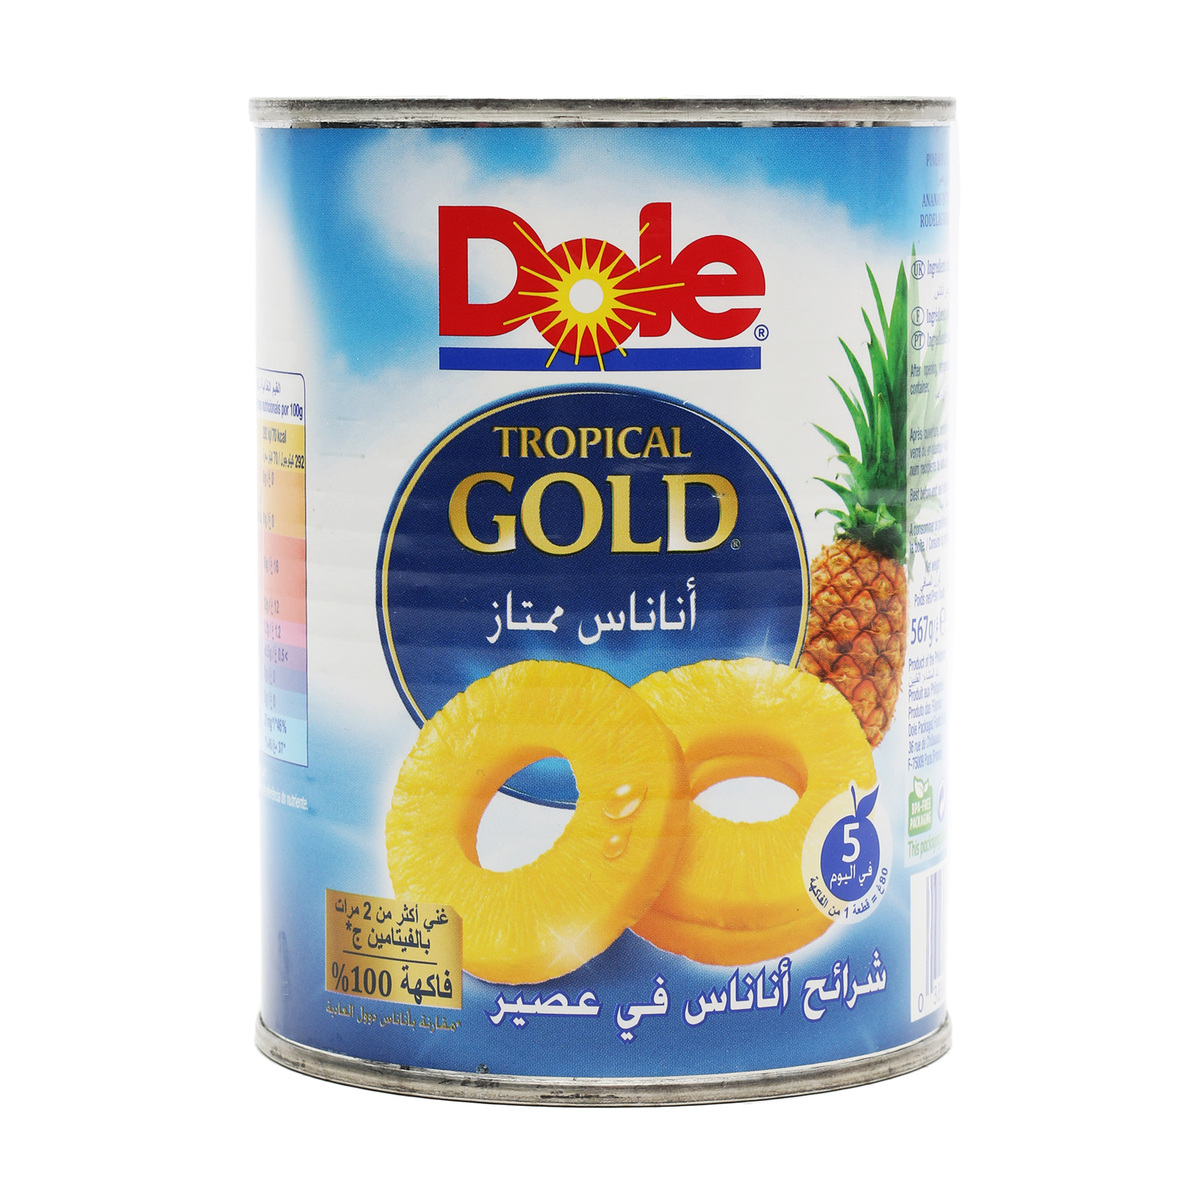 Buy Dole Tropical Gold Pineapple Slices 567 g Online at Best Price | Canned Pineapple | Lulu KSA in Kuwait